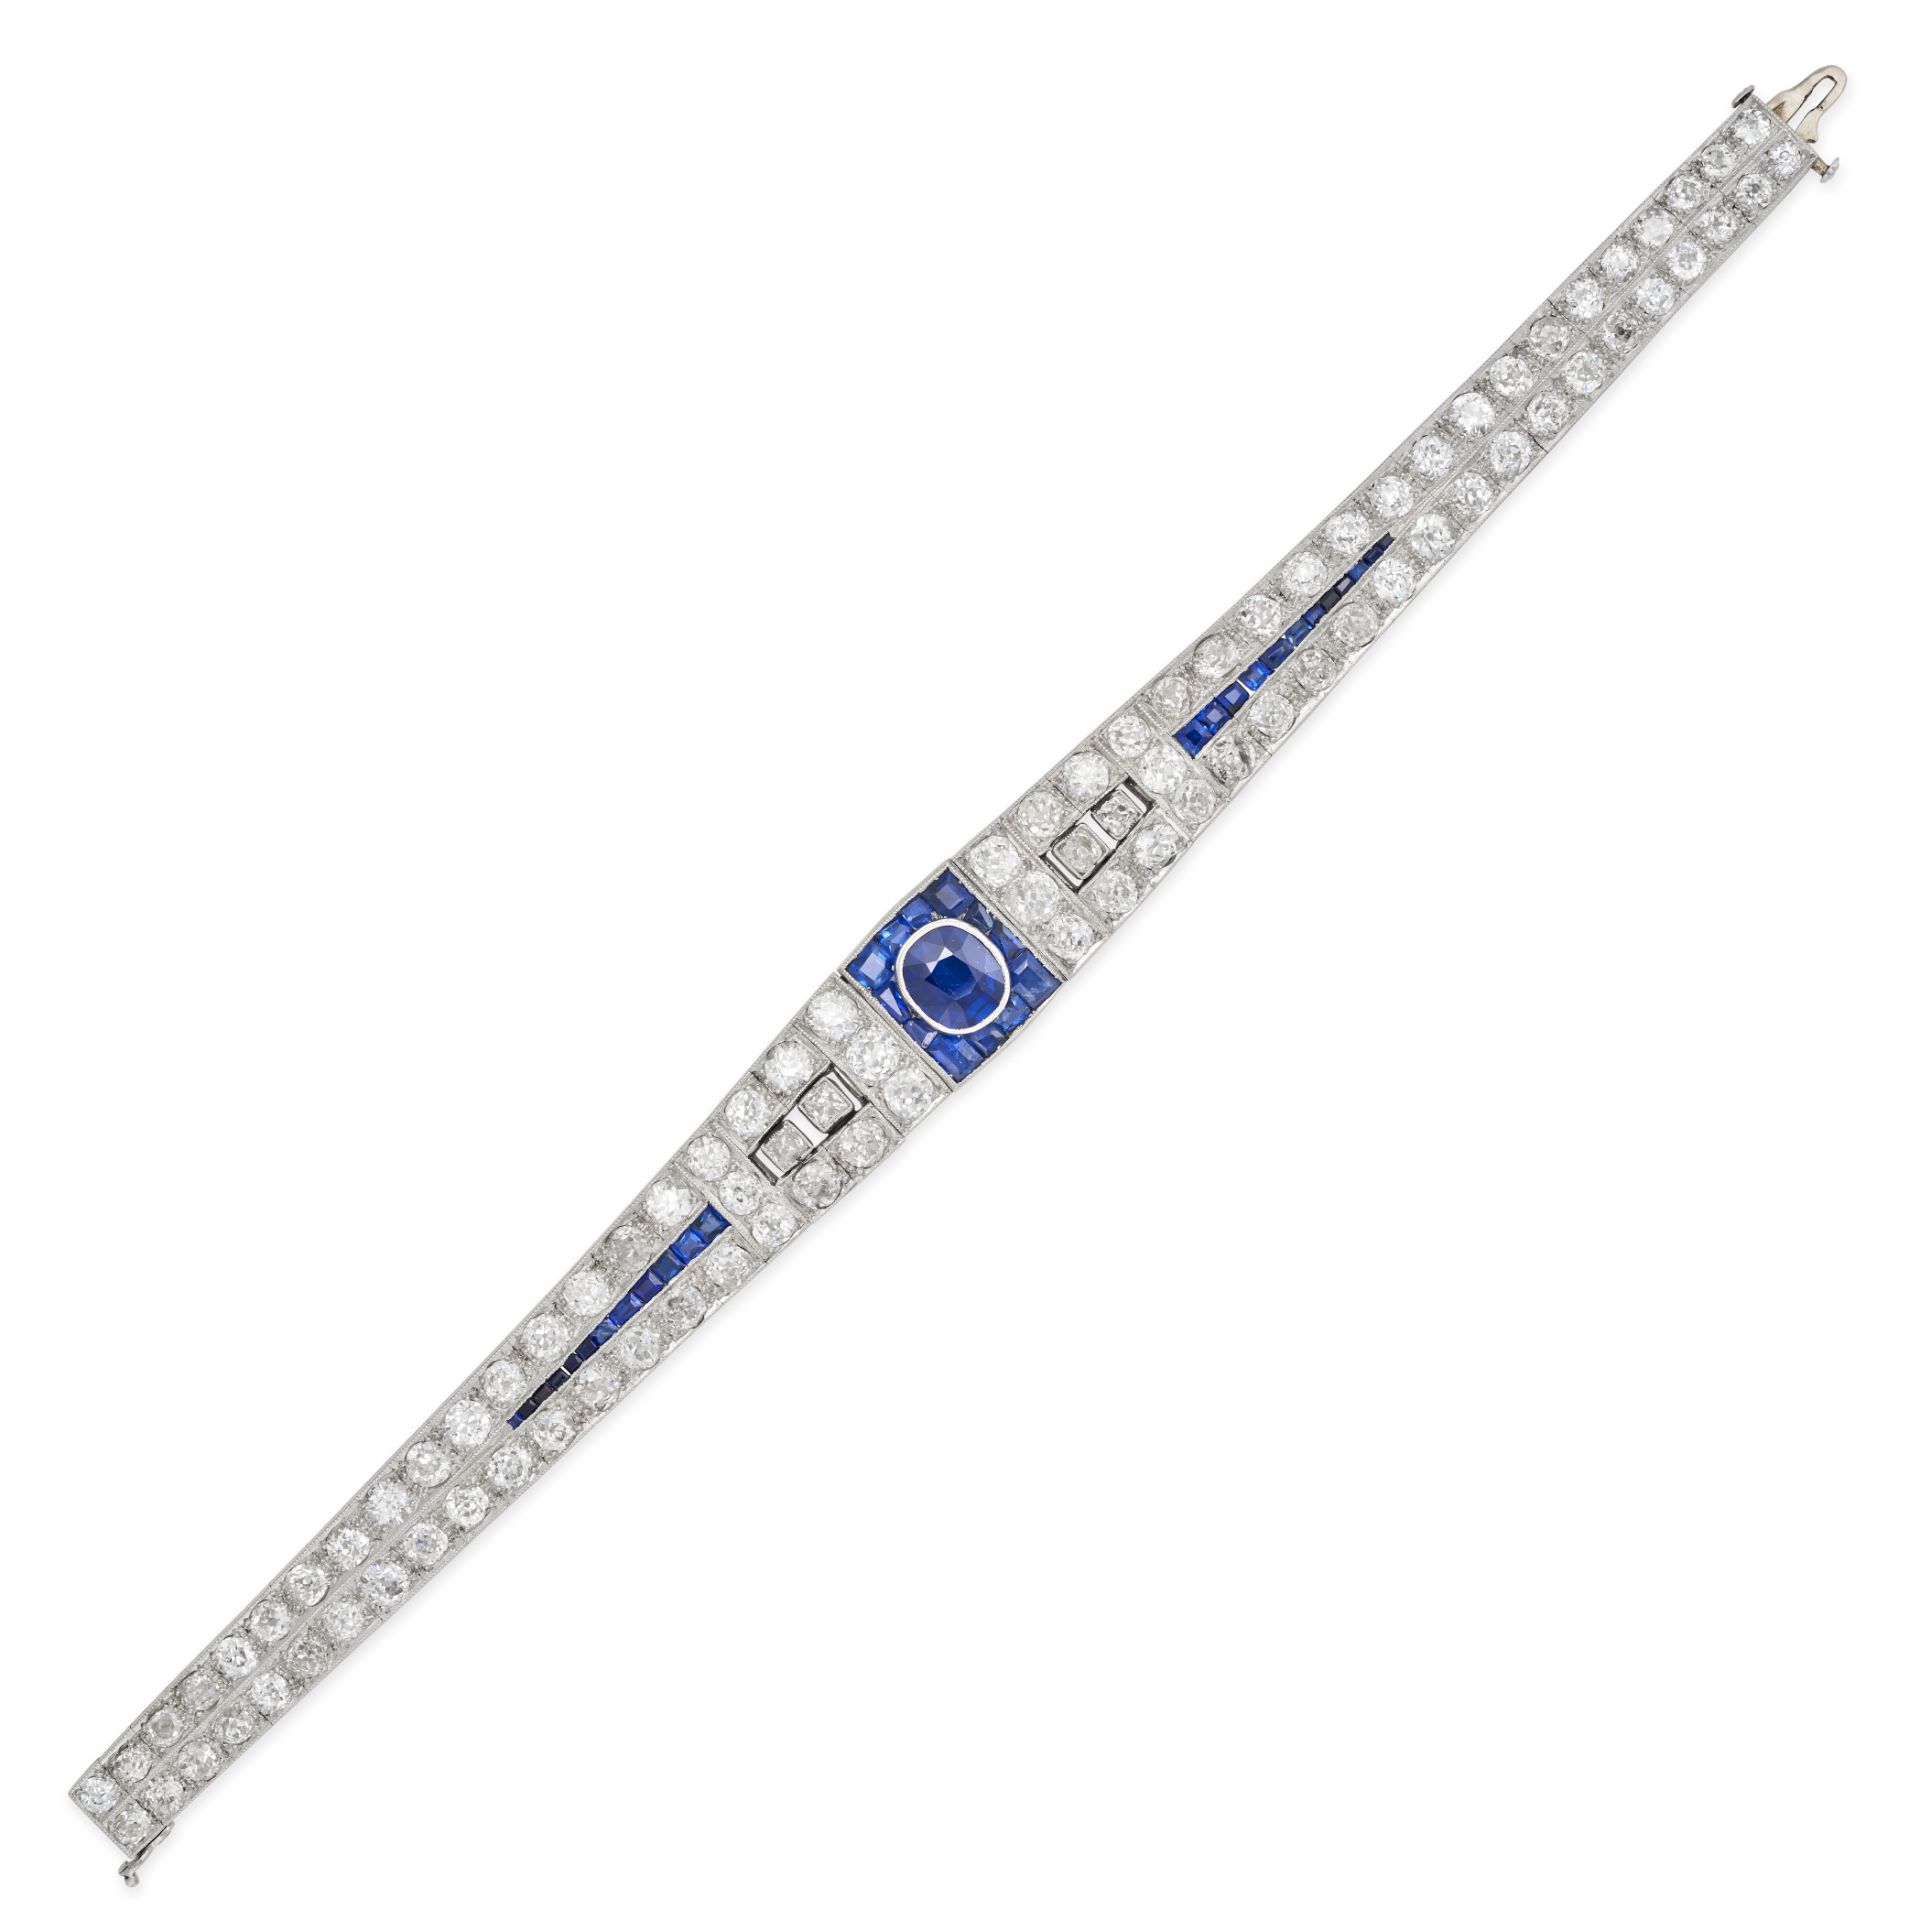 AN ART DECO AUSTRIAN SAPPHIRE AND DIAMOND BRACELET in platinum and gold, set with a cushion cut s...